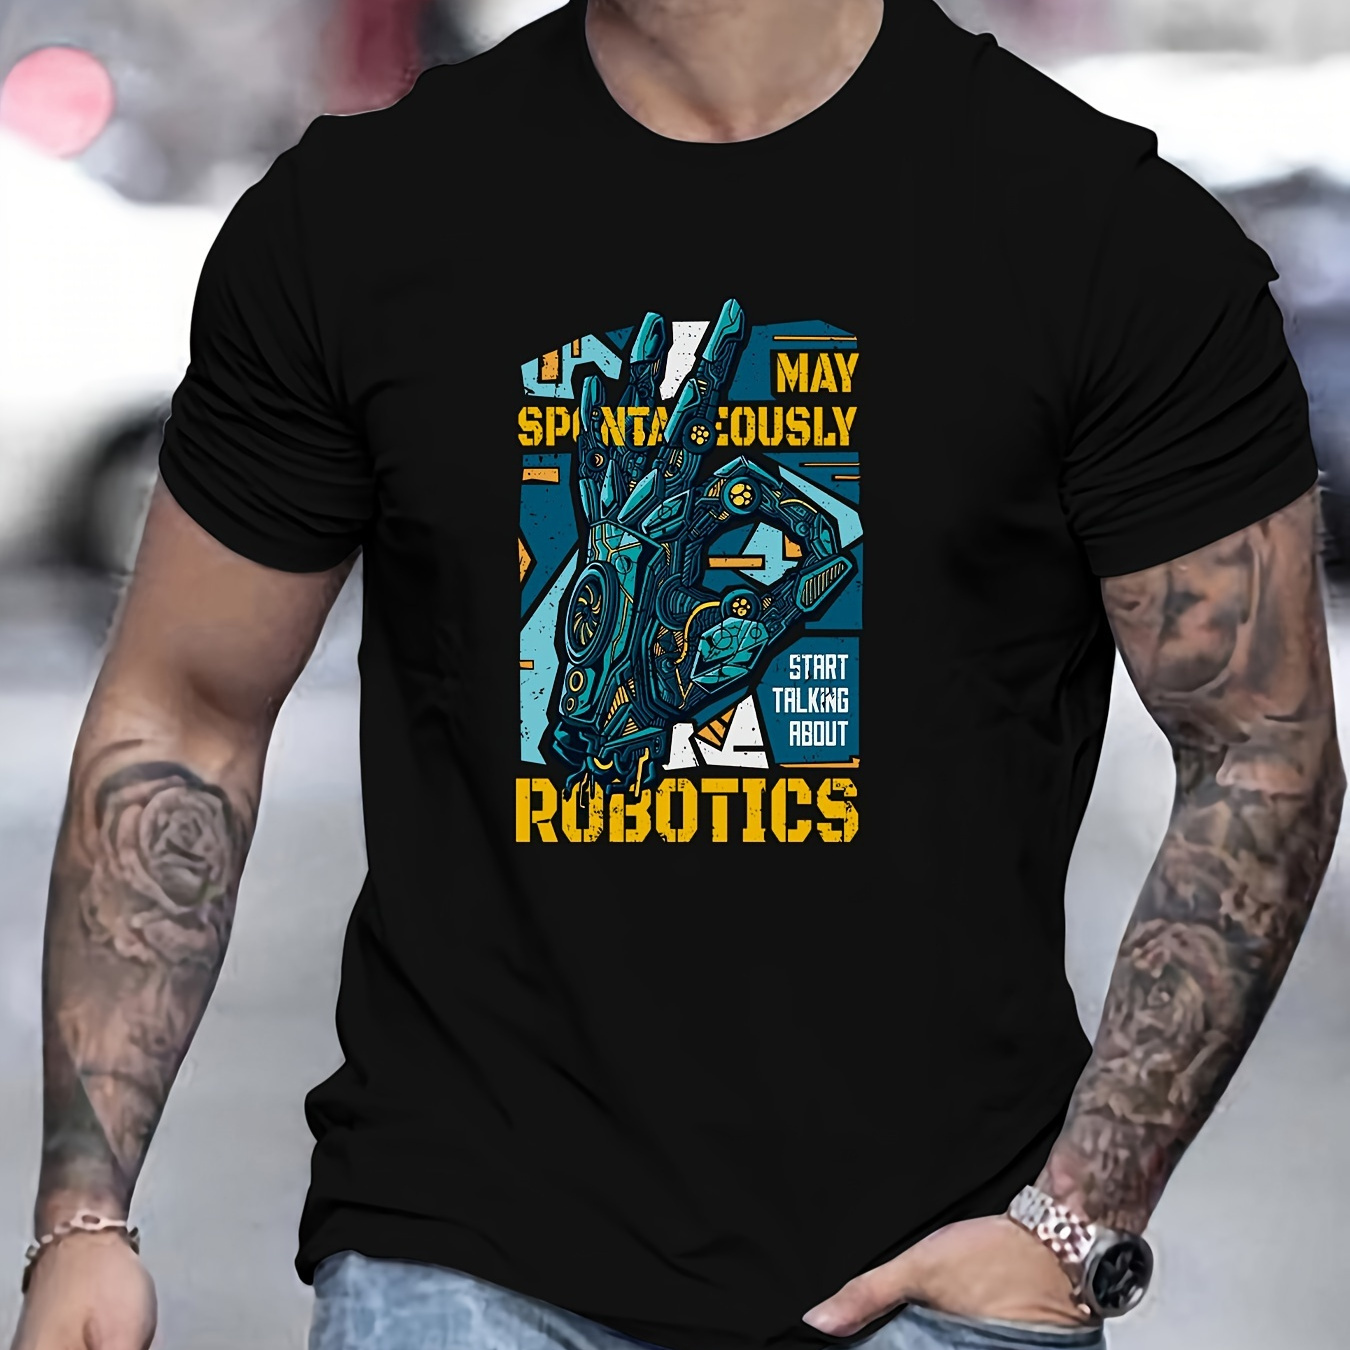 

Casual Robotics Print T-shirt, Trendy Cool Crew Neck Tees For Men, Short Sleeve T-shirt For Summer And Spring